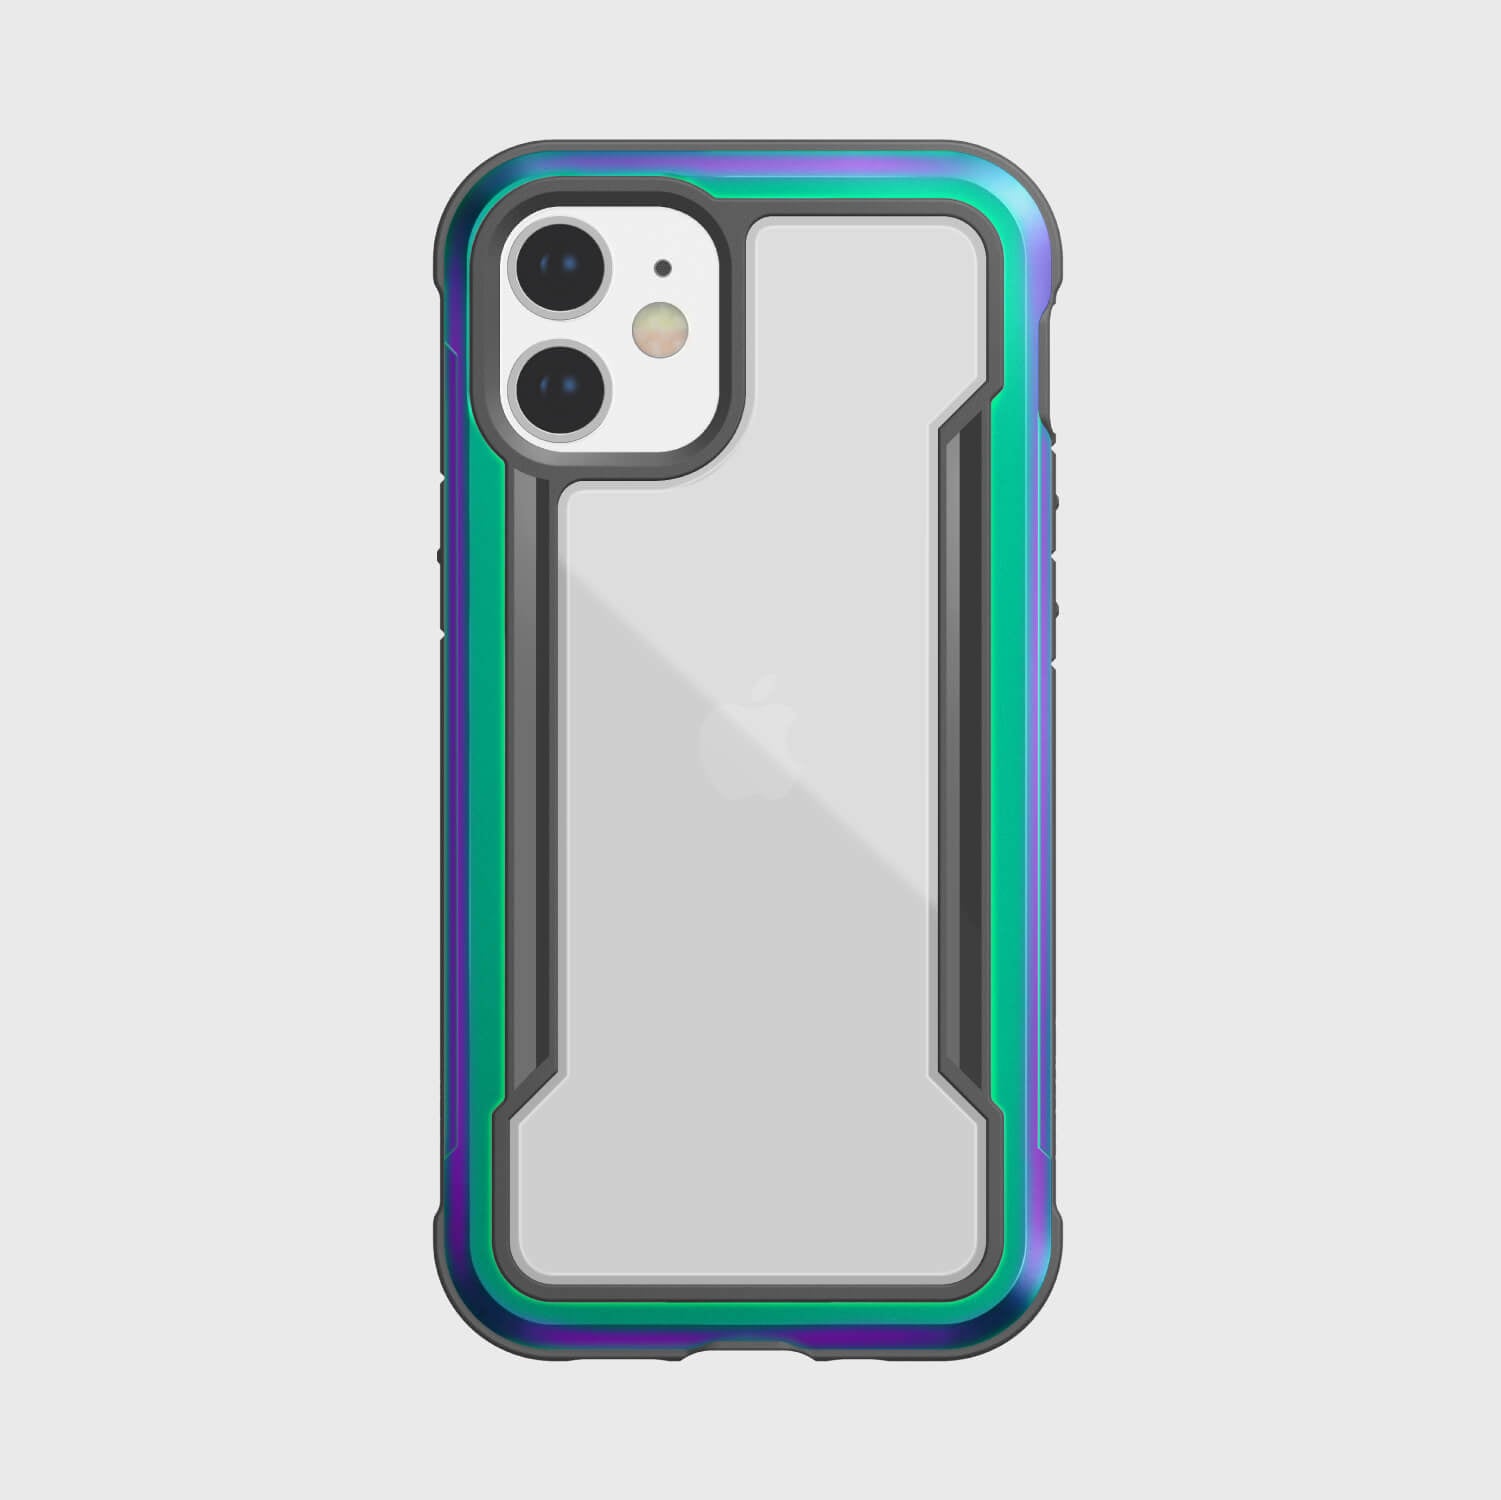 The back view of an iPhone 12 Mini Case - SHIELD by Raptic in blue and green.